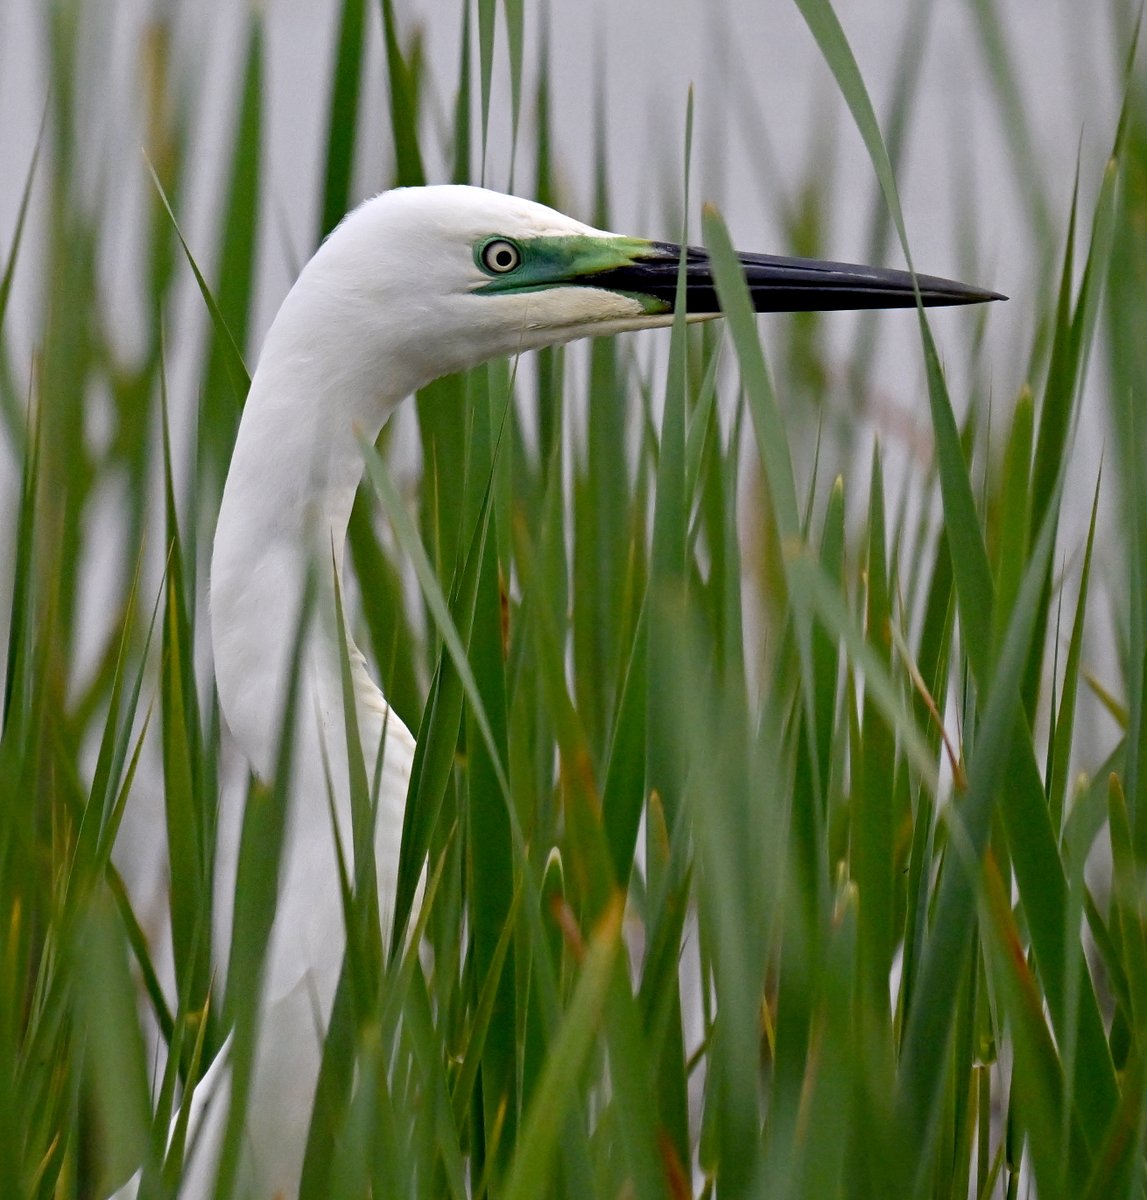 Great White Egret wearing make-up to match the reeds.... 😁 Taken today at RSPB Ham Wall in Somerset. 😊🐦